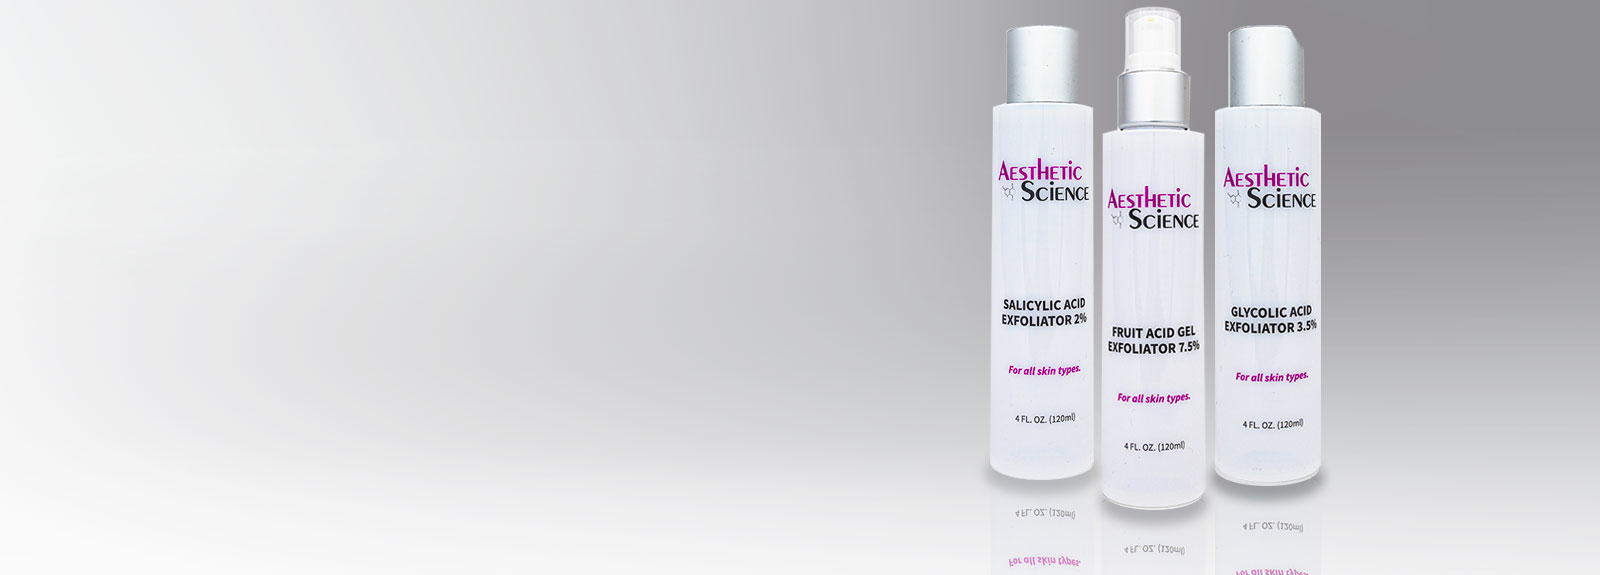 Aesthetic Science Skincare's assorted professional exfoliators from their professional skincare product line